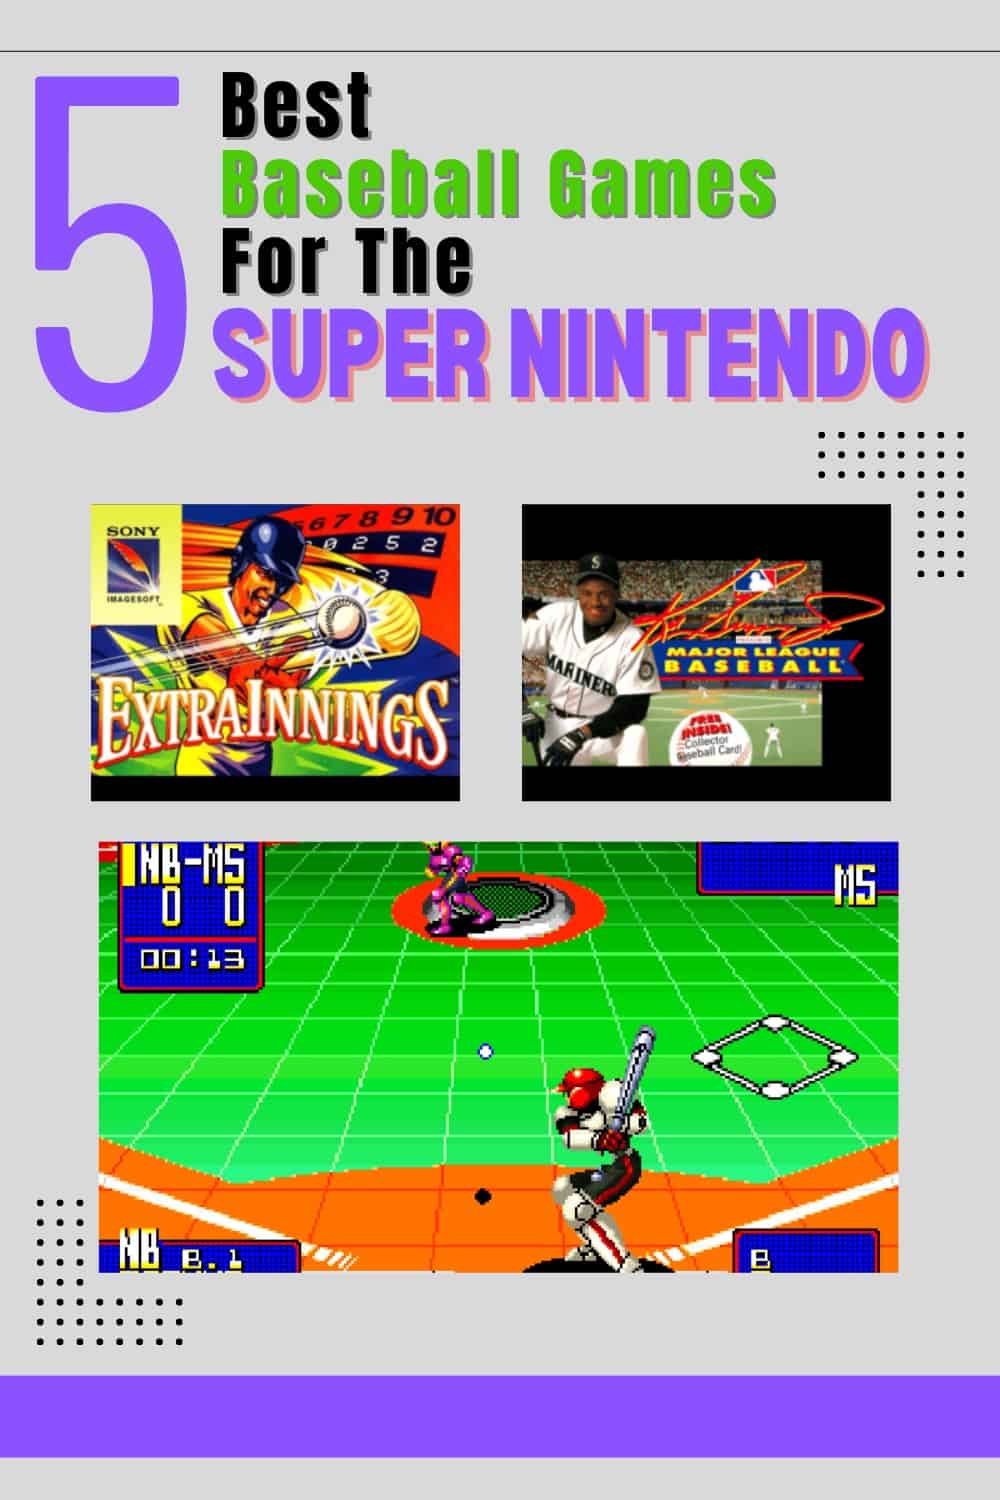 What is the best baseball game for SNES?